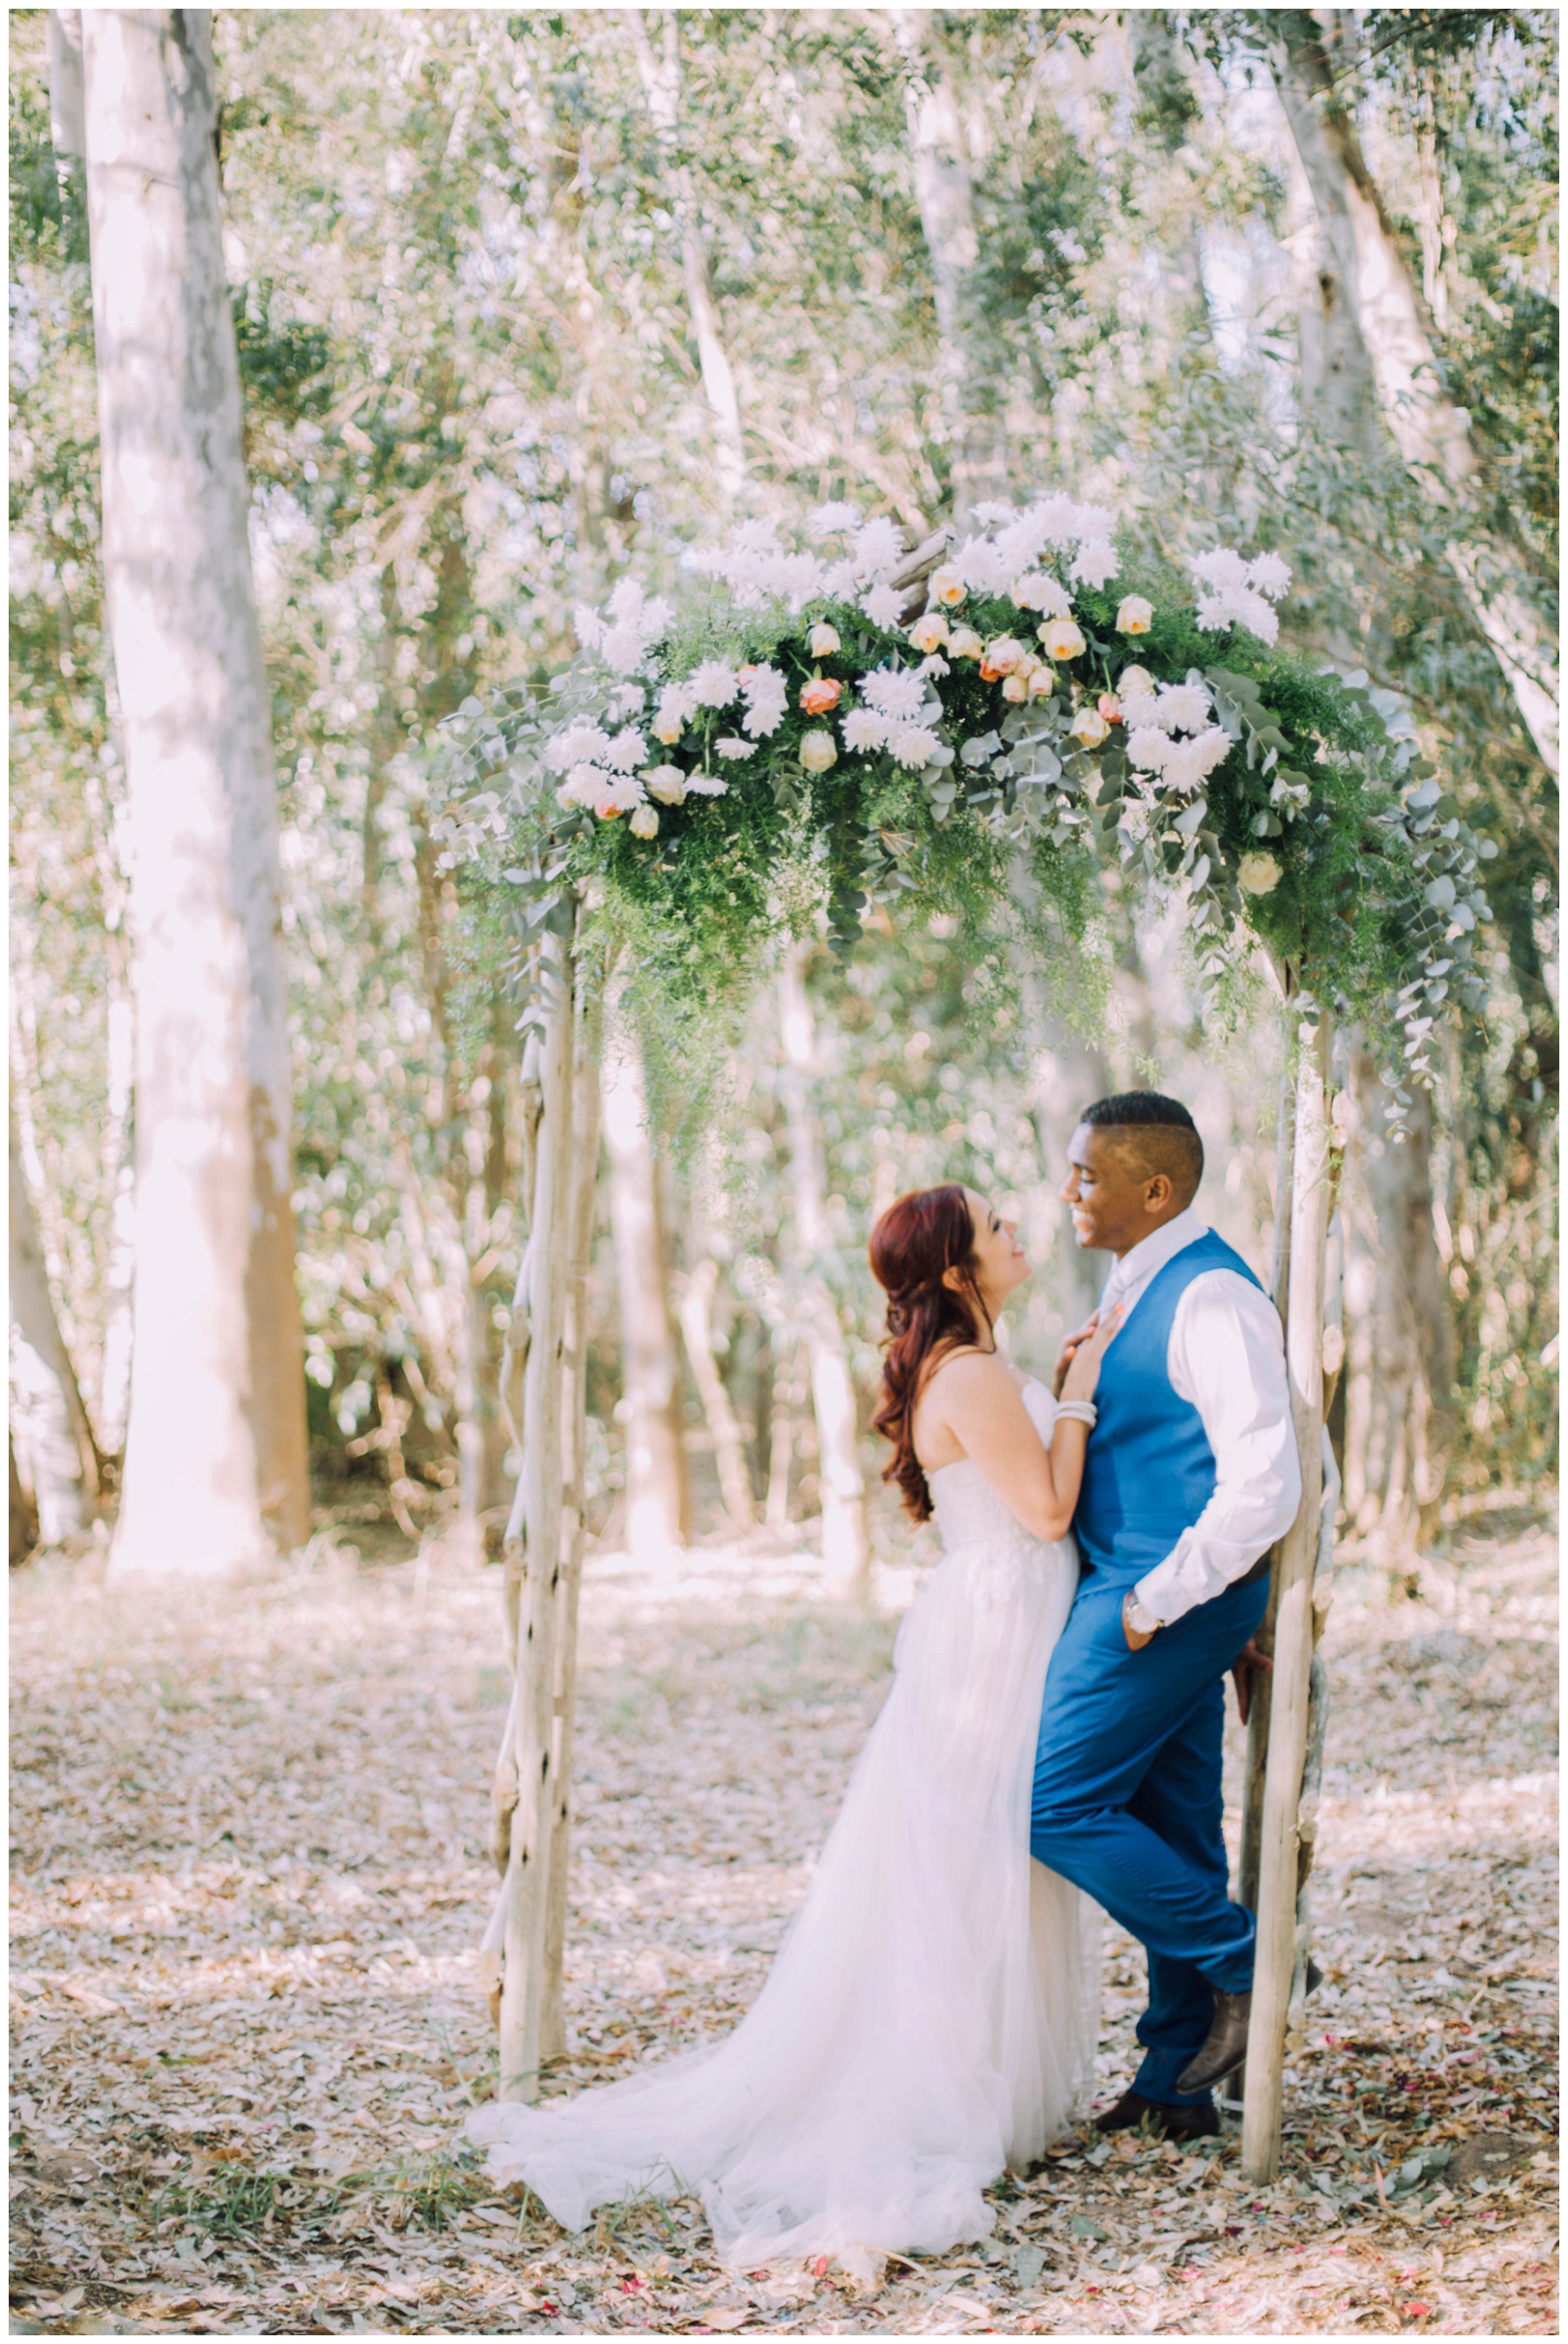 Ronel Kruger Cape Town Wedding and Lifestyle Photographer_1337.jpg